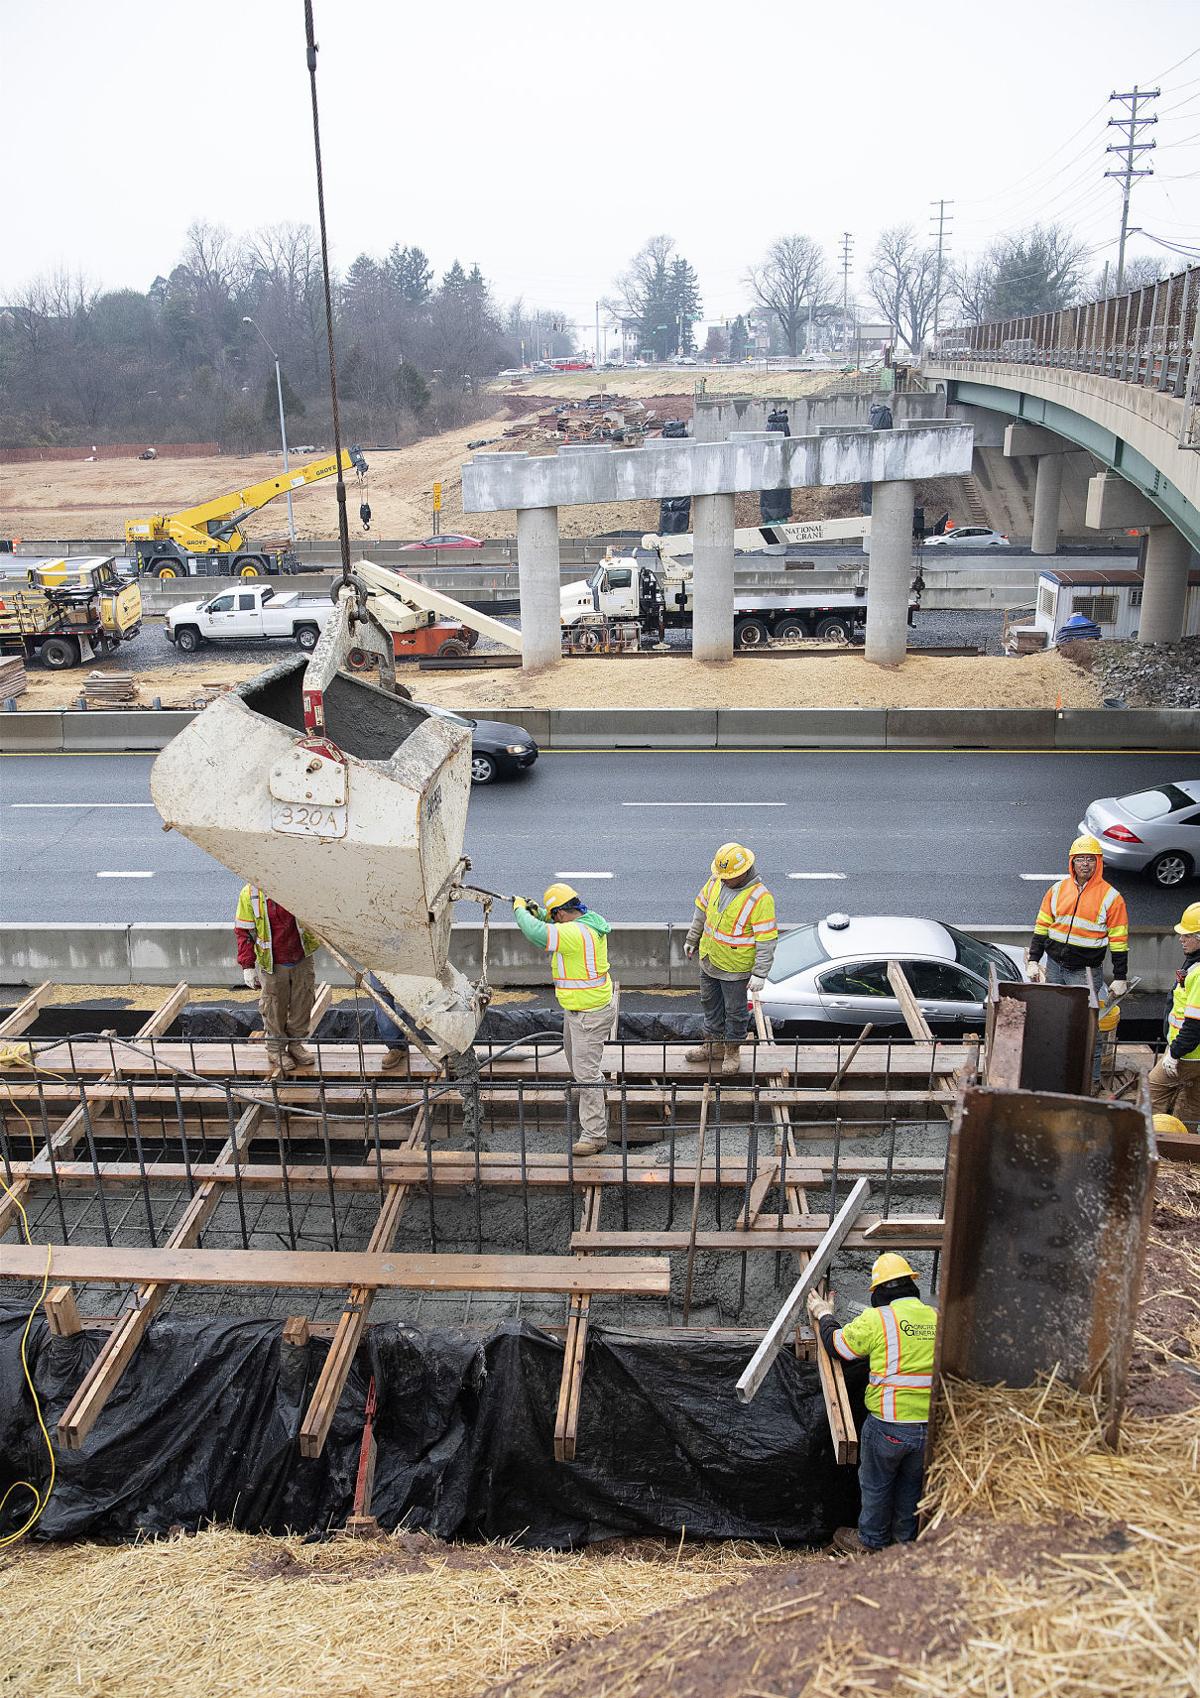 Work continues on road projects in cold weather | Public Safety ...